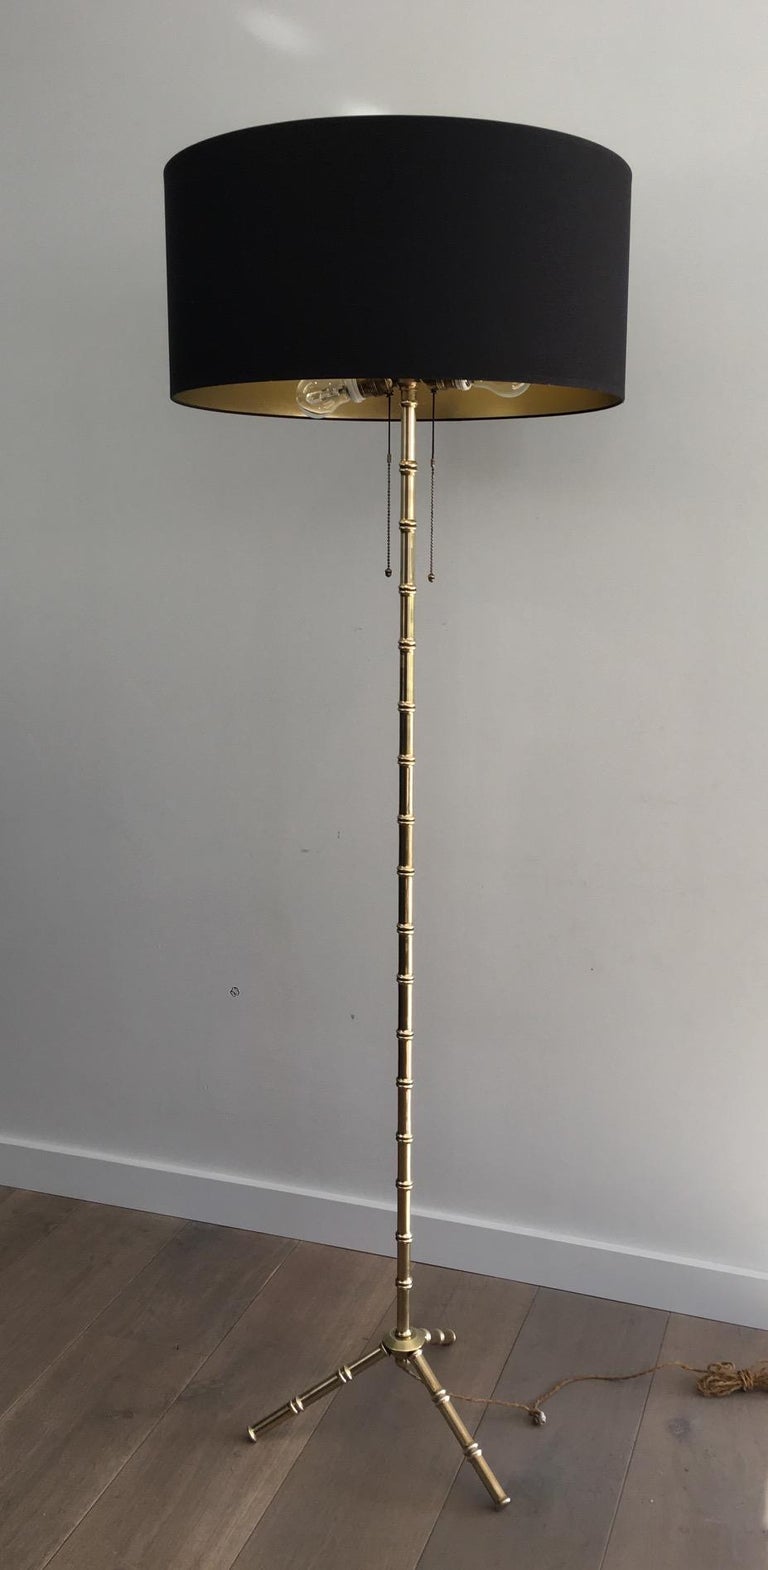 Jacques Adnet Faux-Bamboo Bronze and Brass Floor Lamp, French, circa 1940 For Sale 7